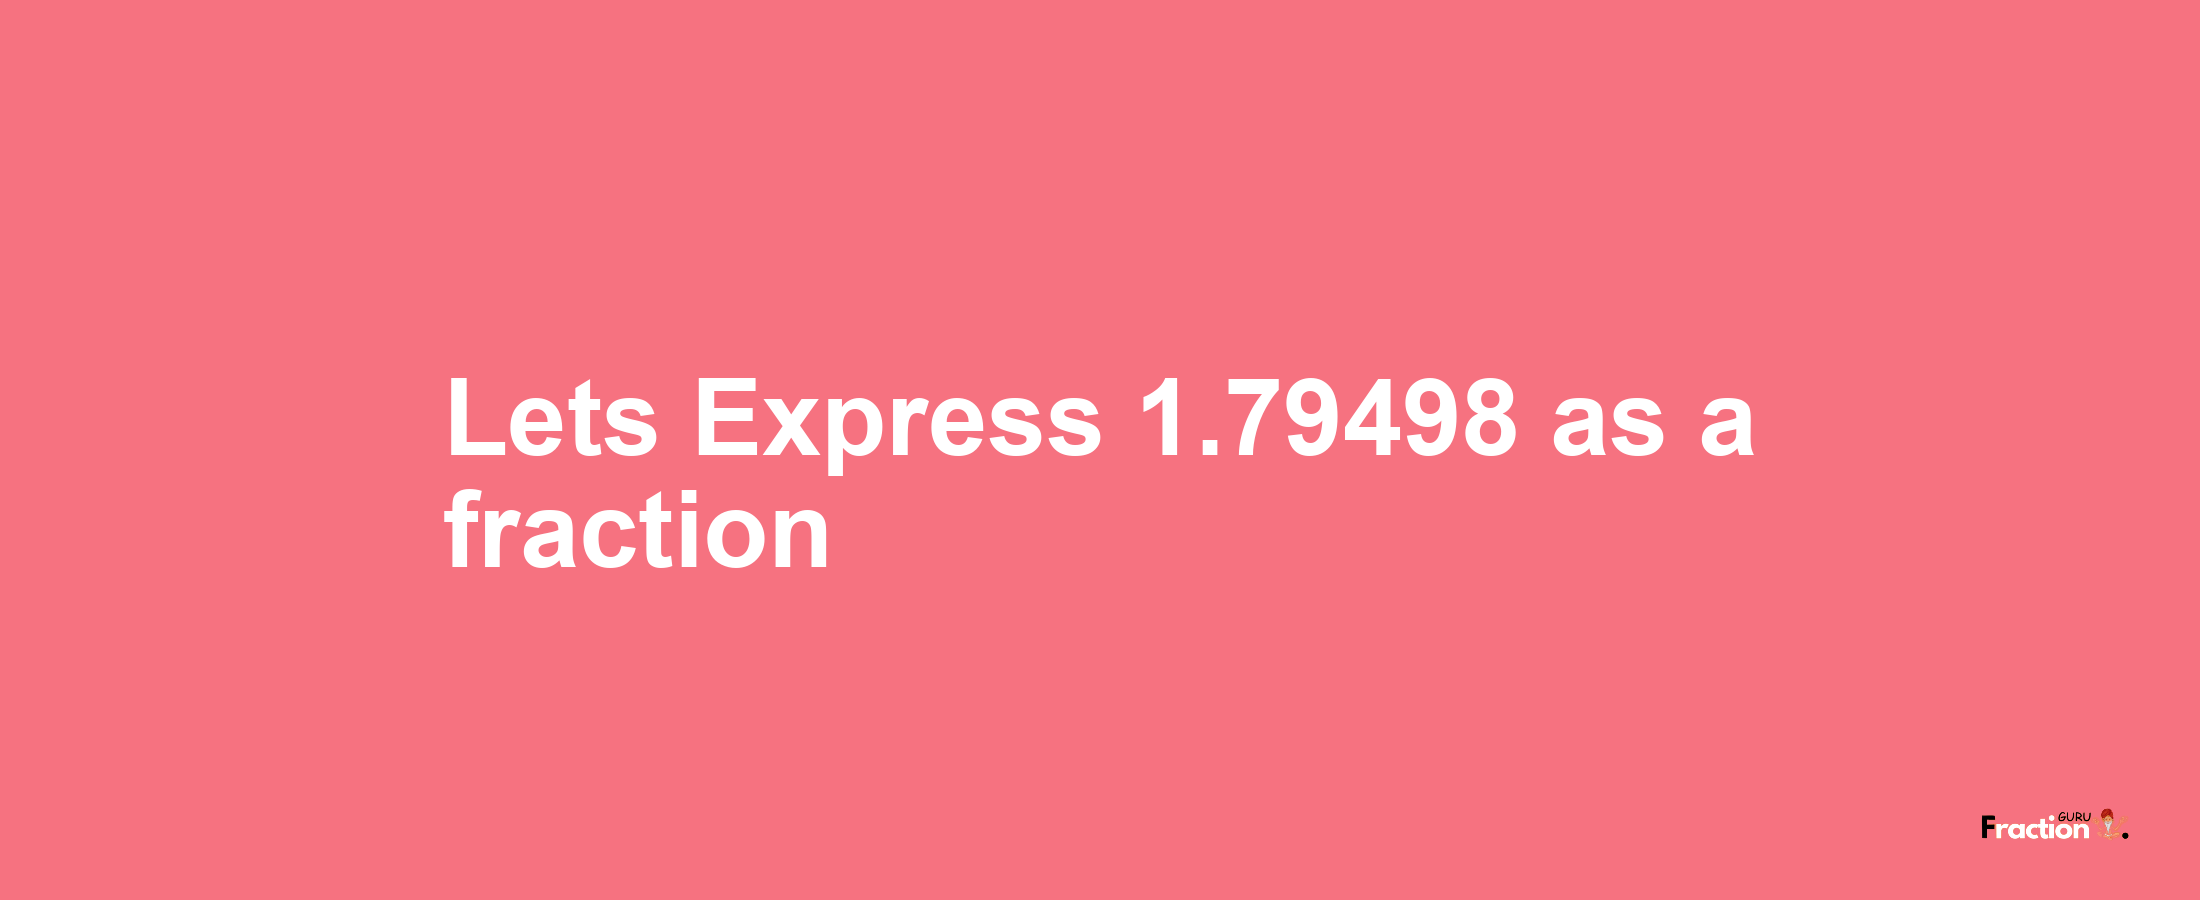 Lets Express 1.79498 as afraction